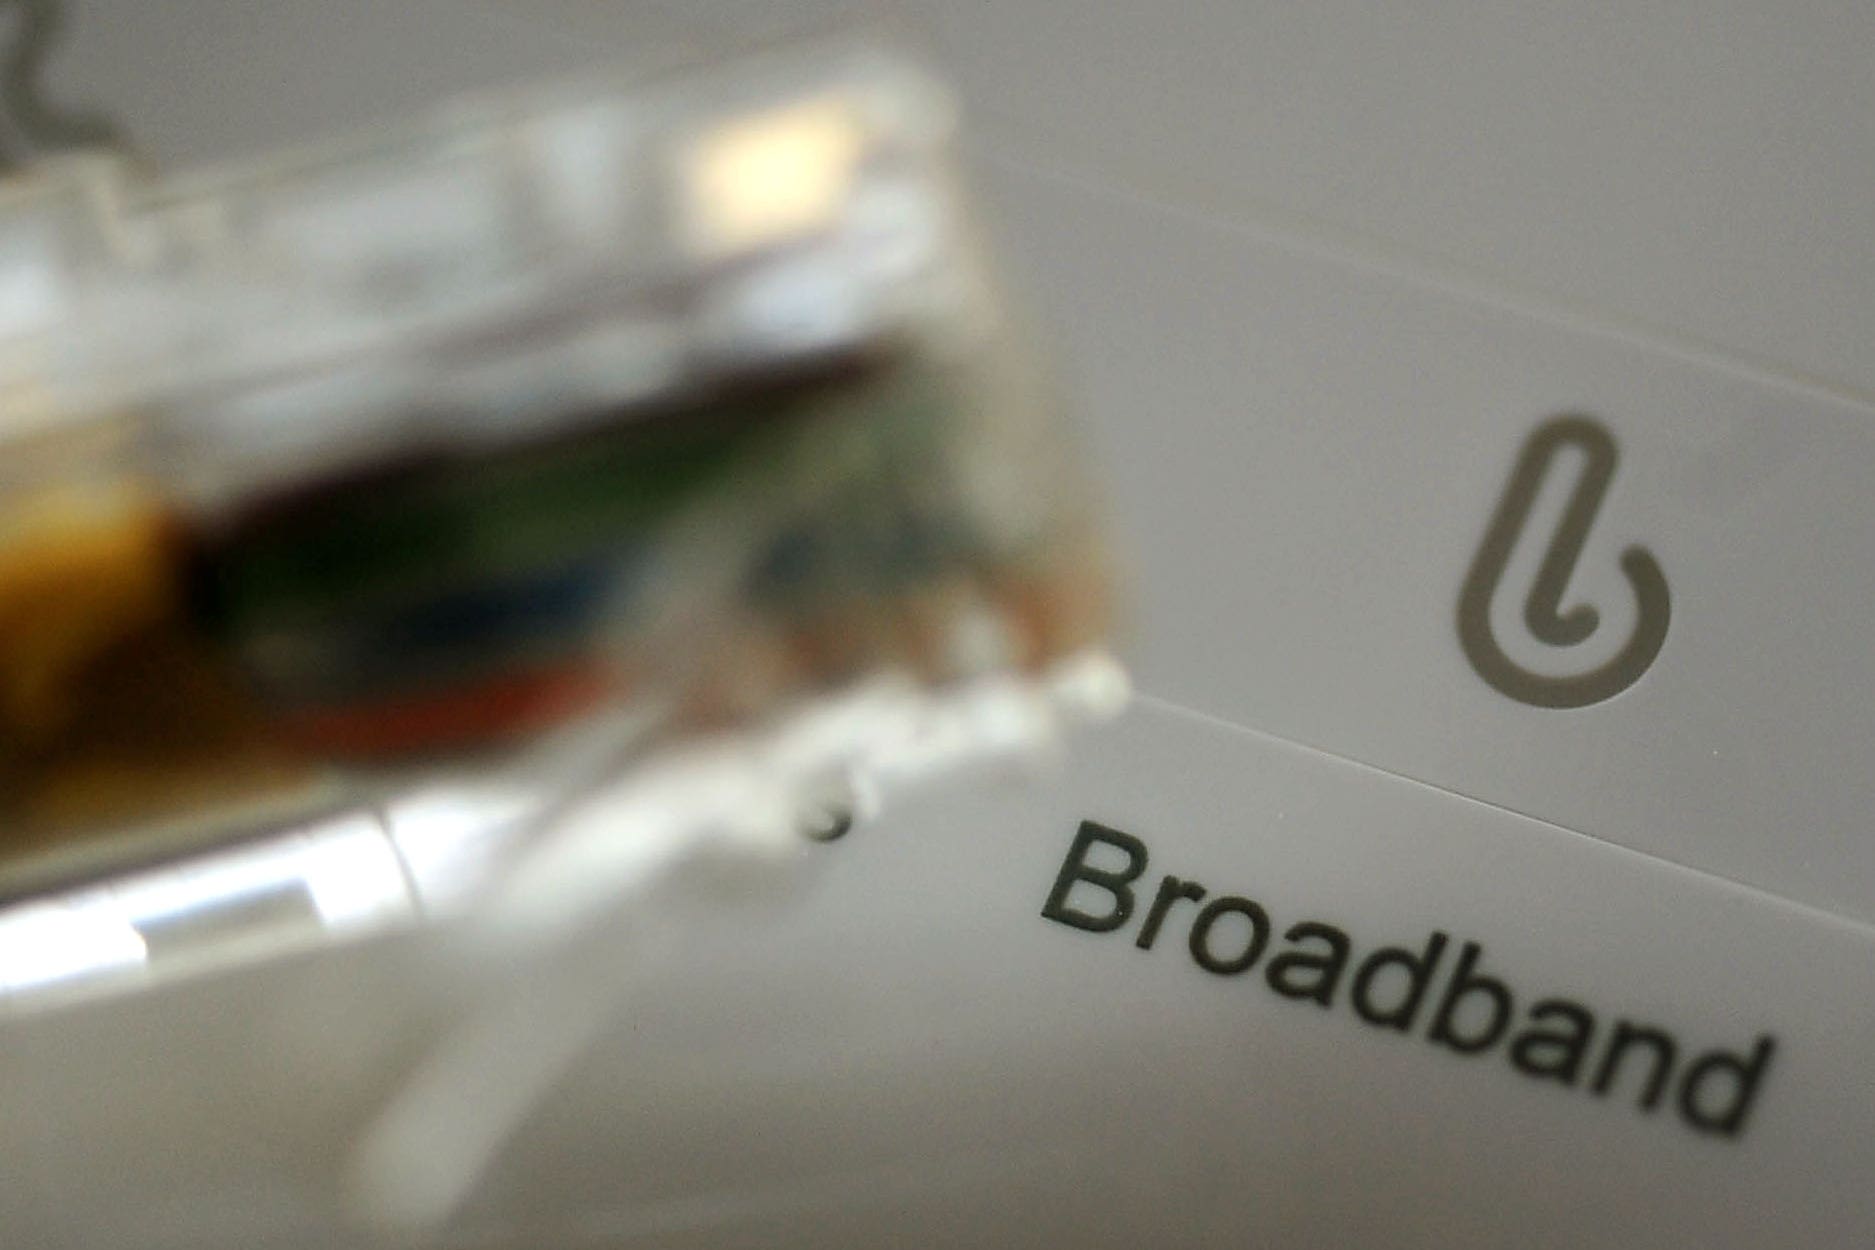 A new round of inflation-linked broadband price rises is expected in April